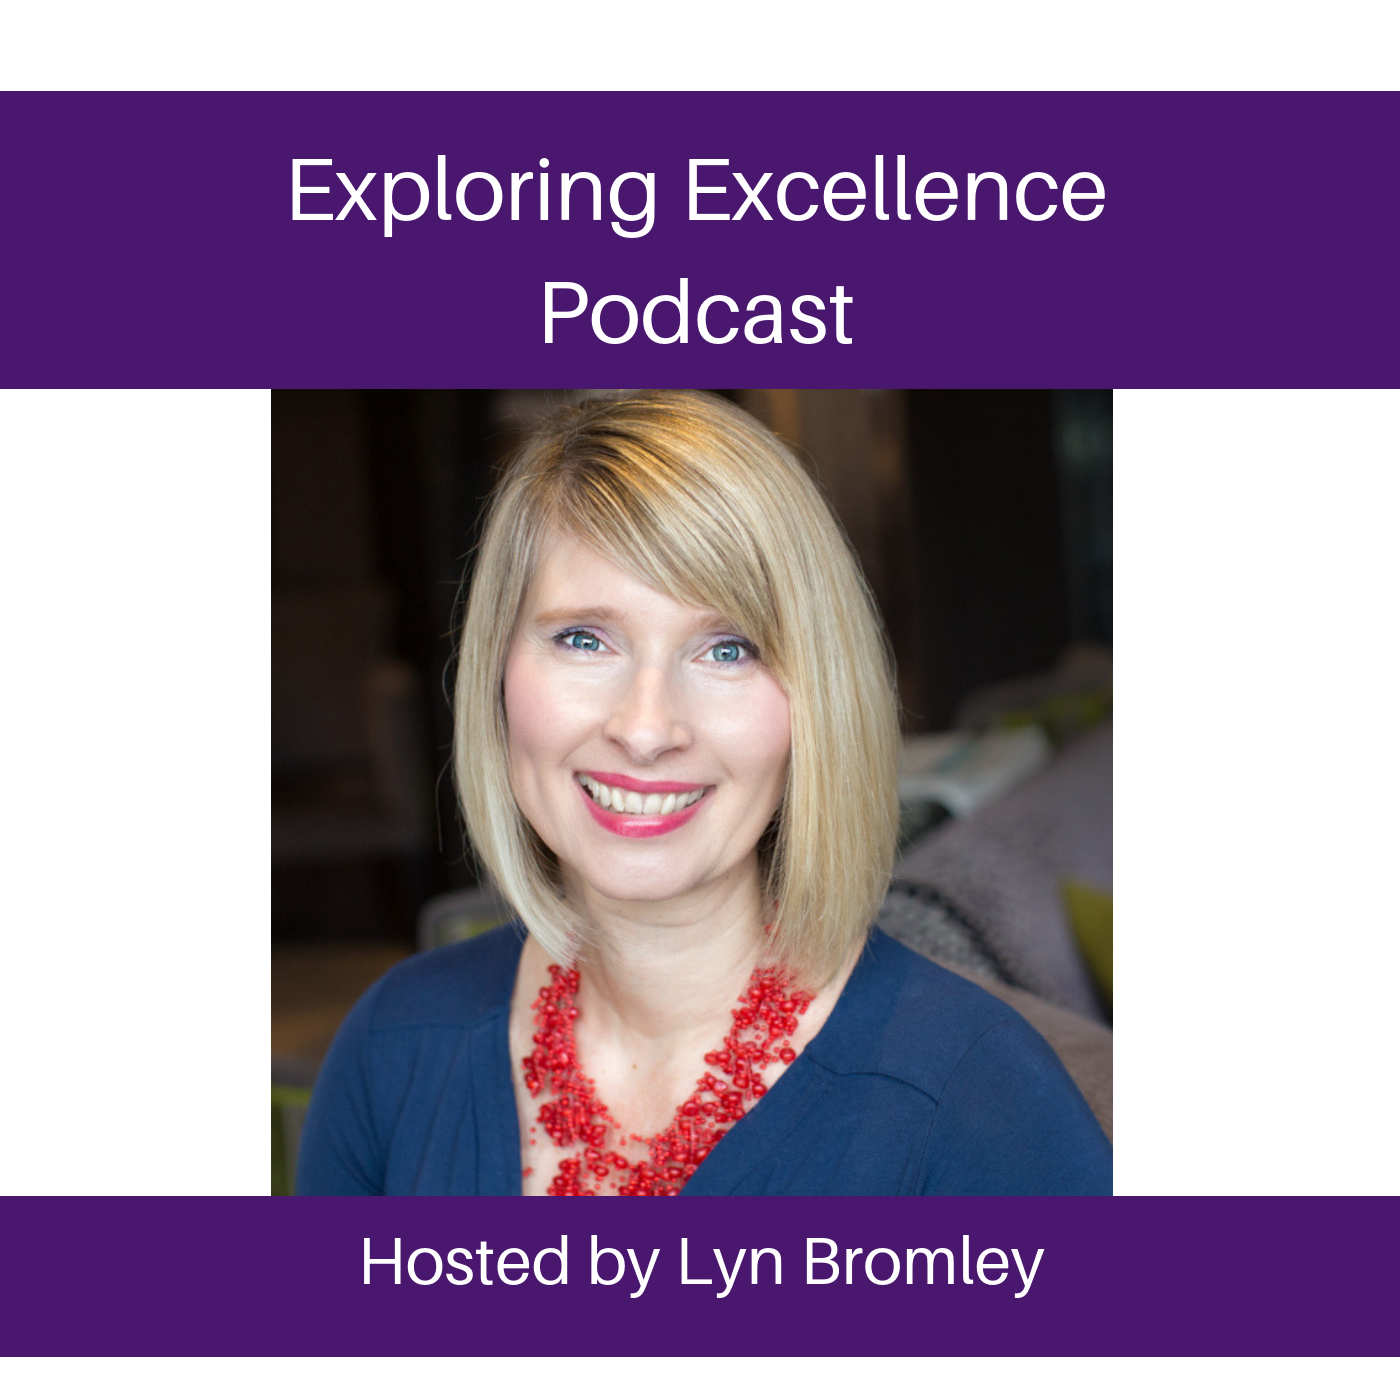 Exploring Excellence in Professional Services